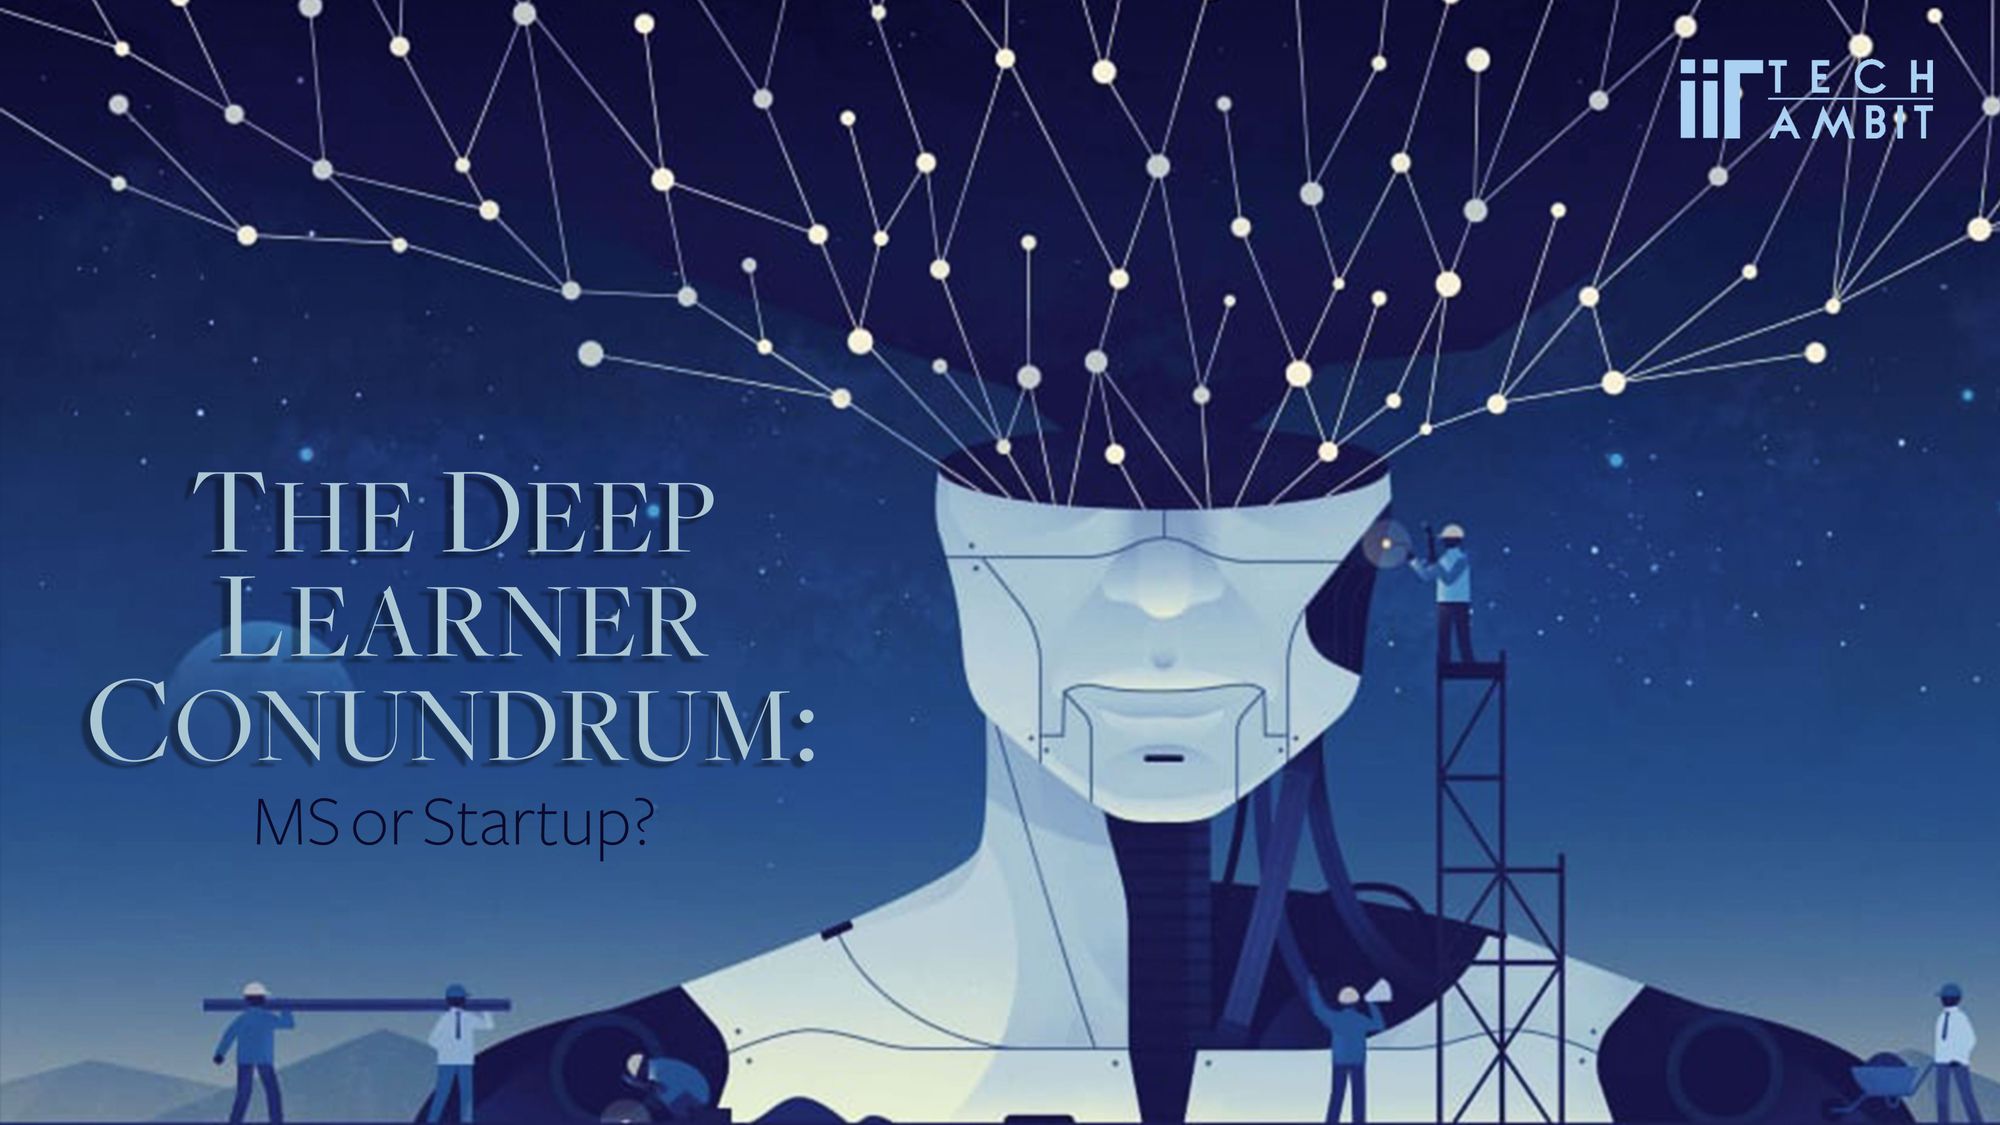 The Deep Learner
conundrum:
MS or Startup?